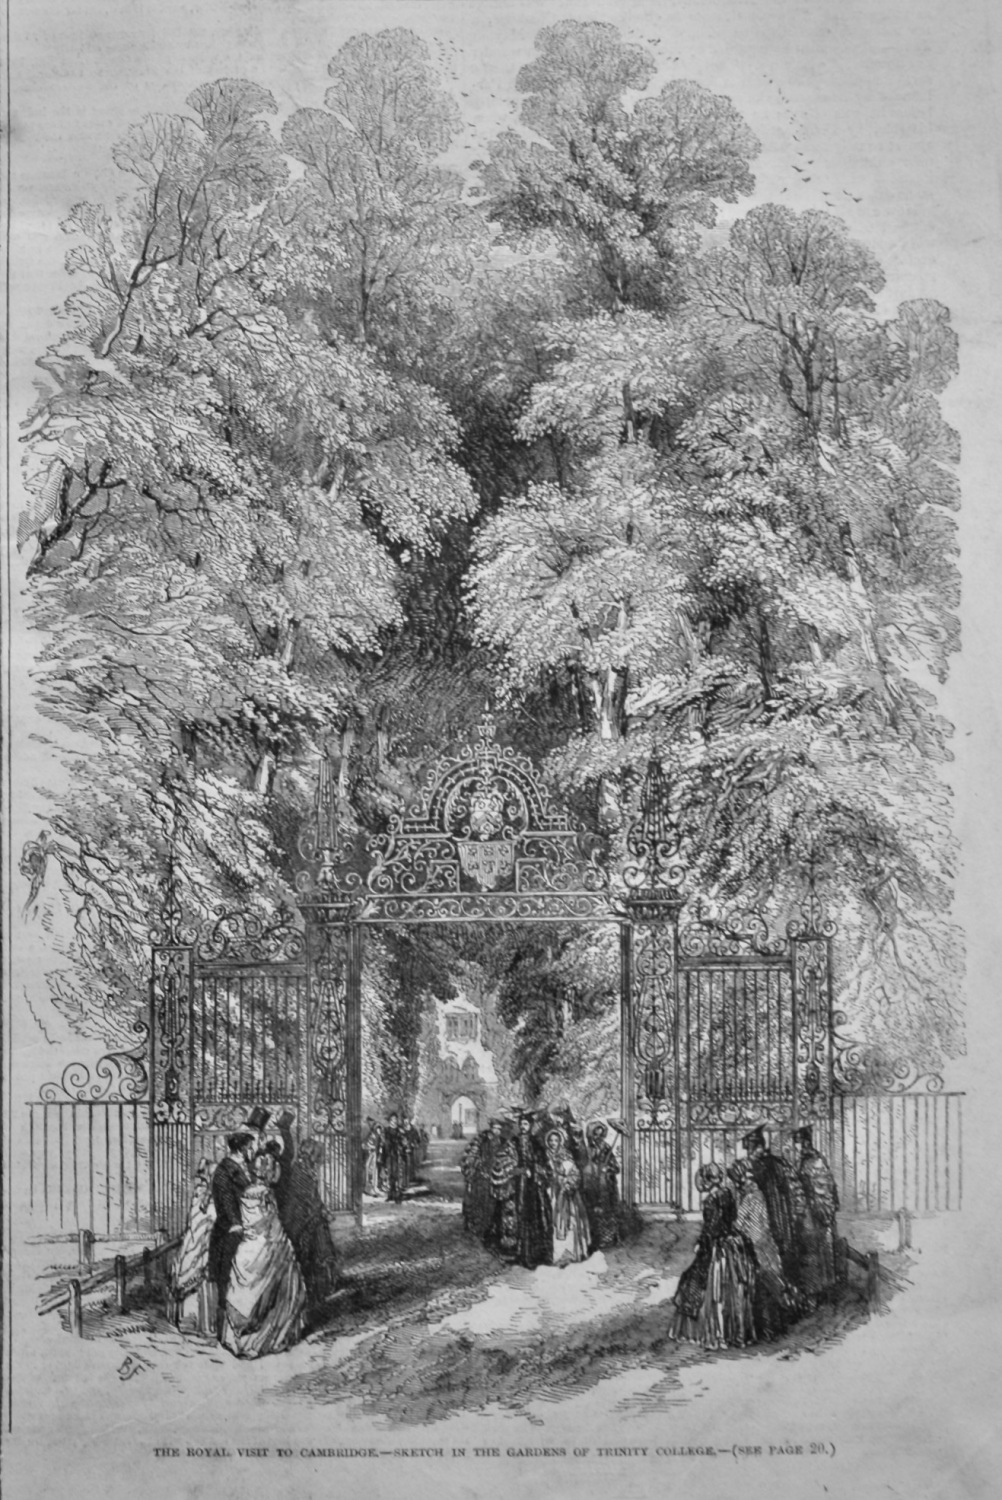 The Royal Visit to Cambridge.-Sketch in the Gardens of Trinity College.  18